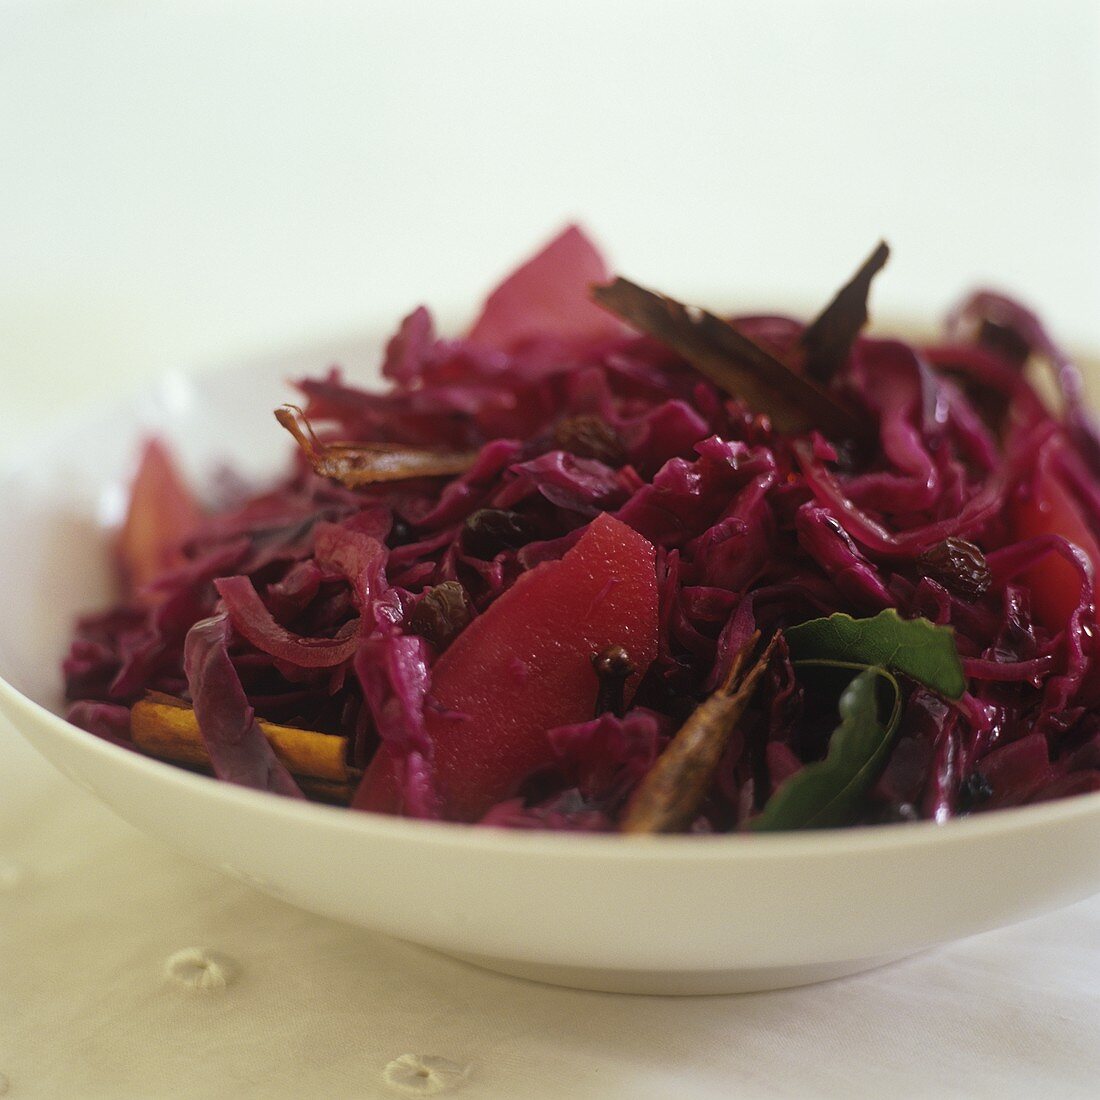 Apple and red cabbage with raisins (side dish)